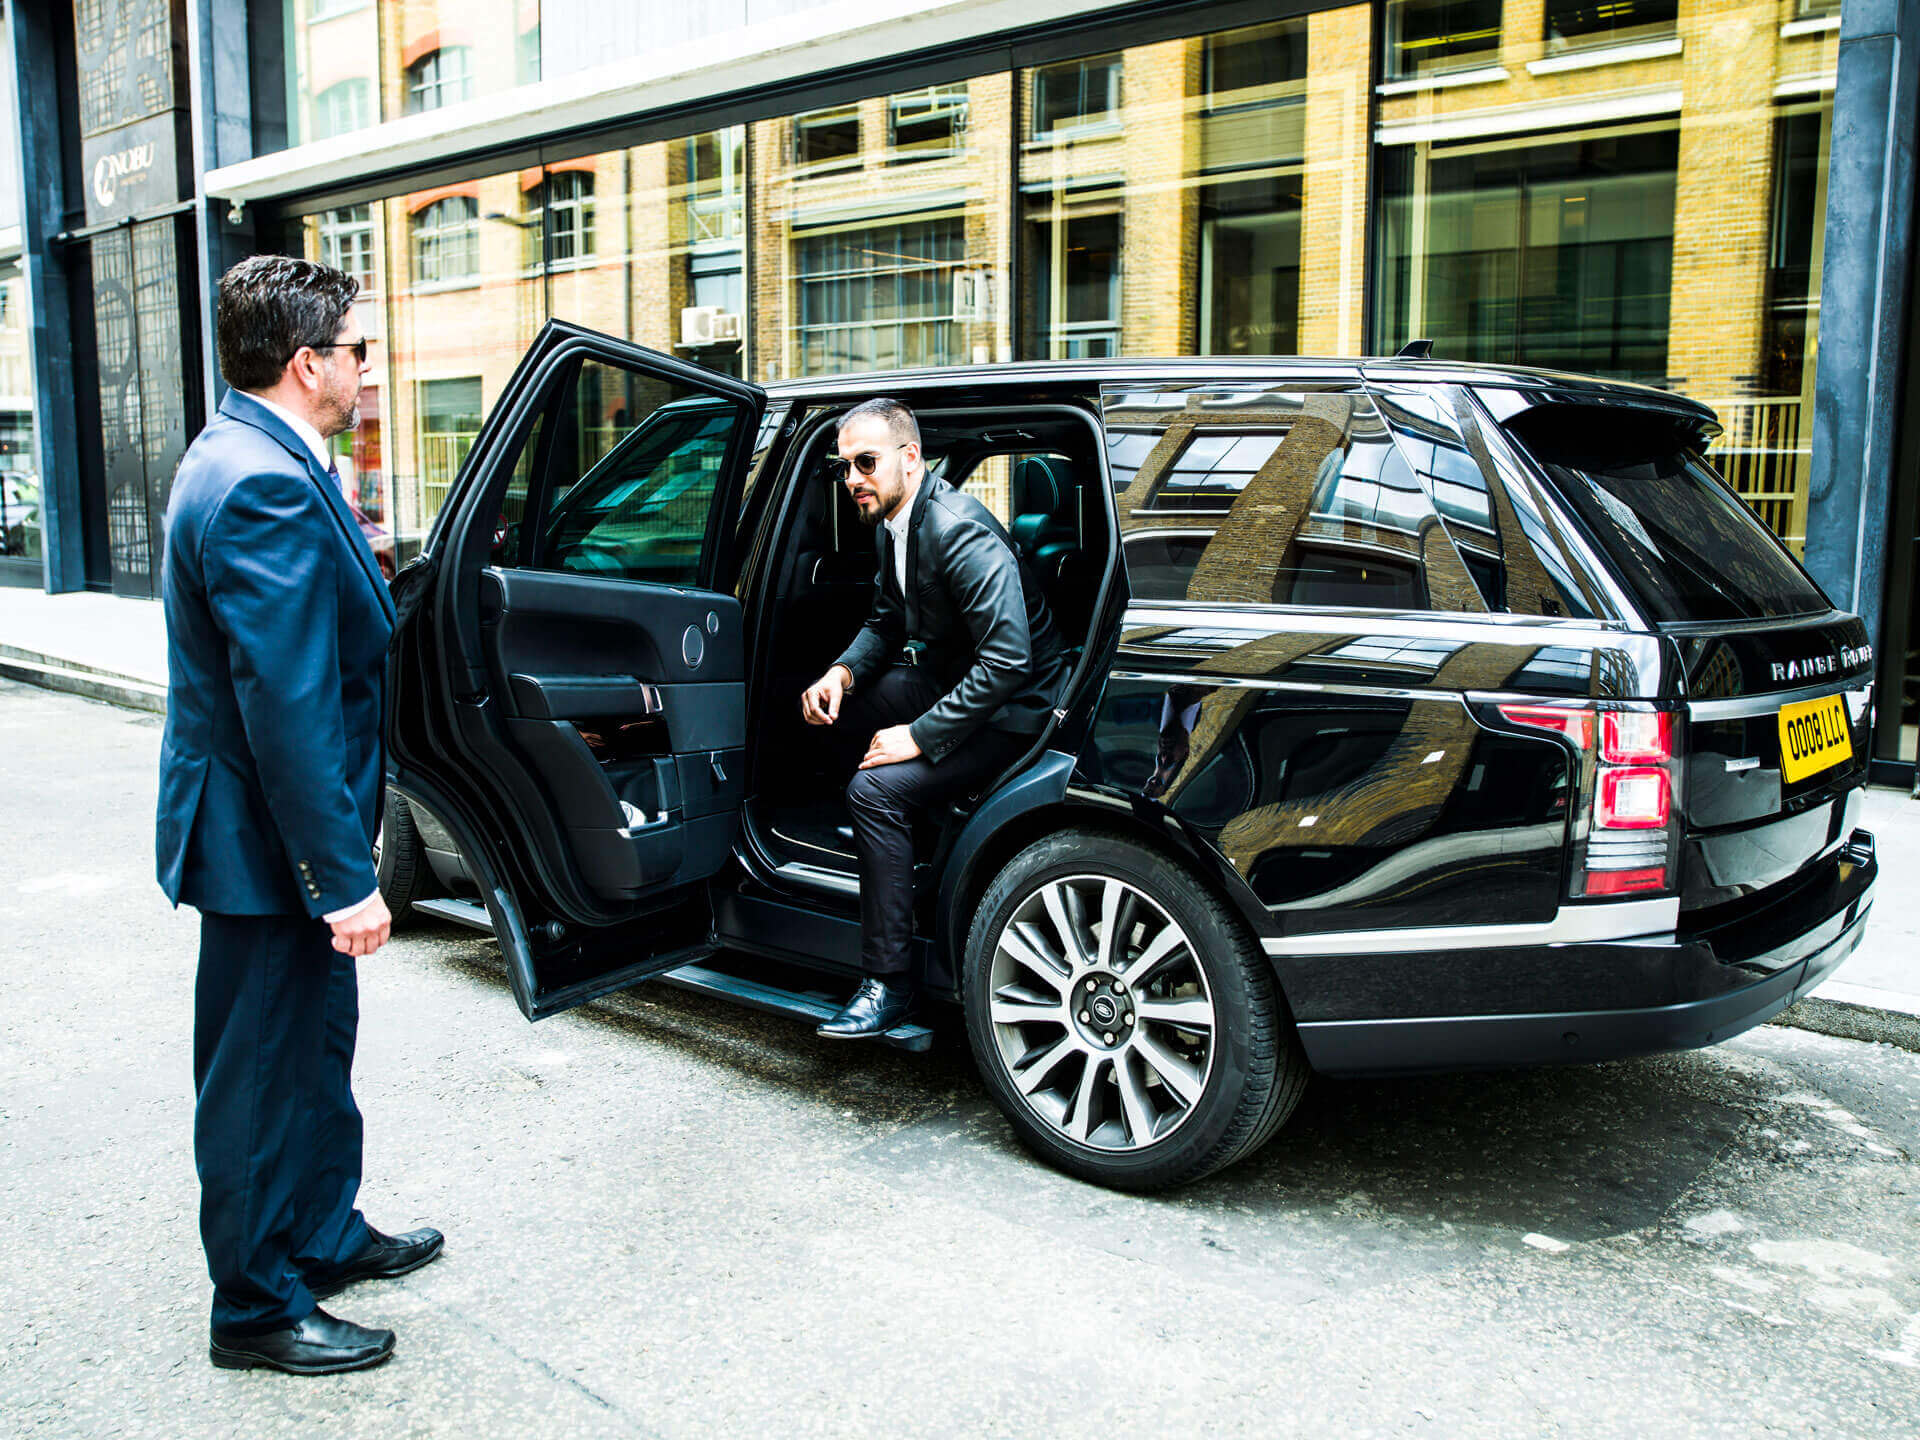 Chauffeur Hire Services for The Elite London Event